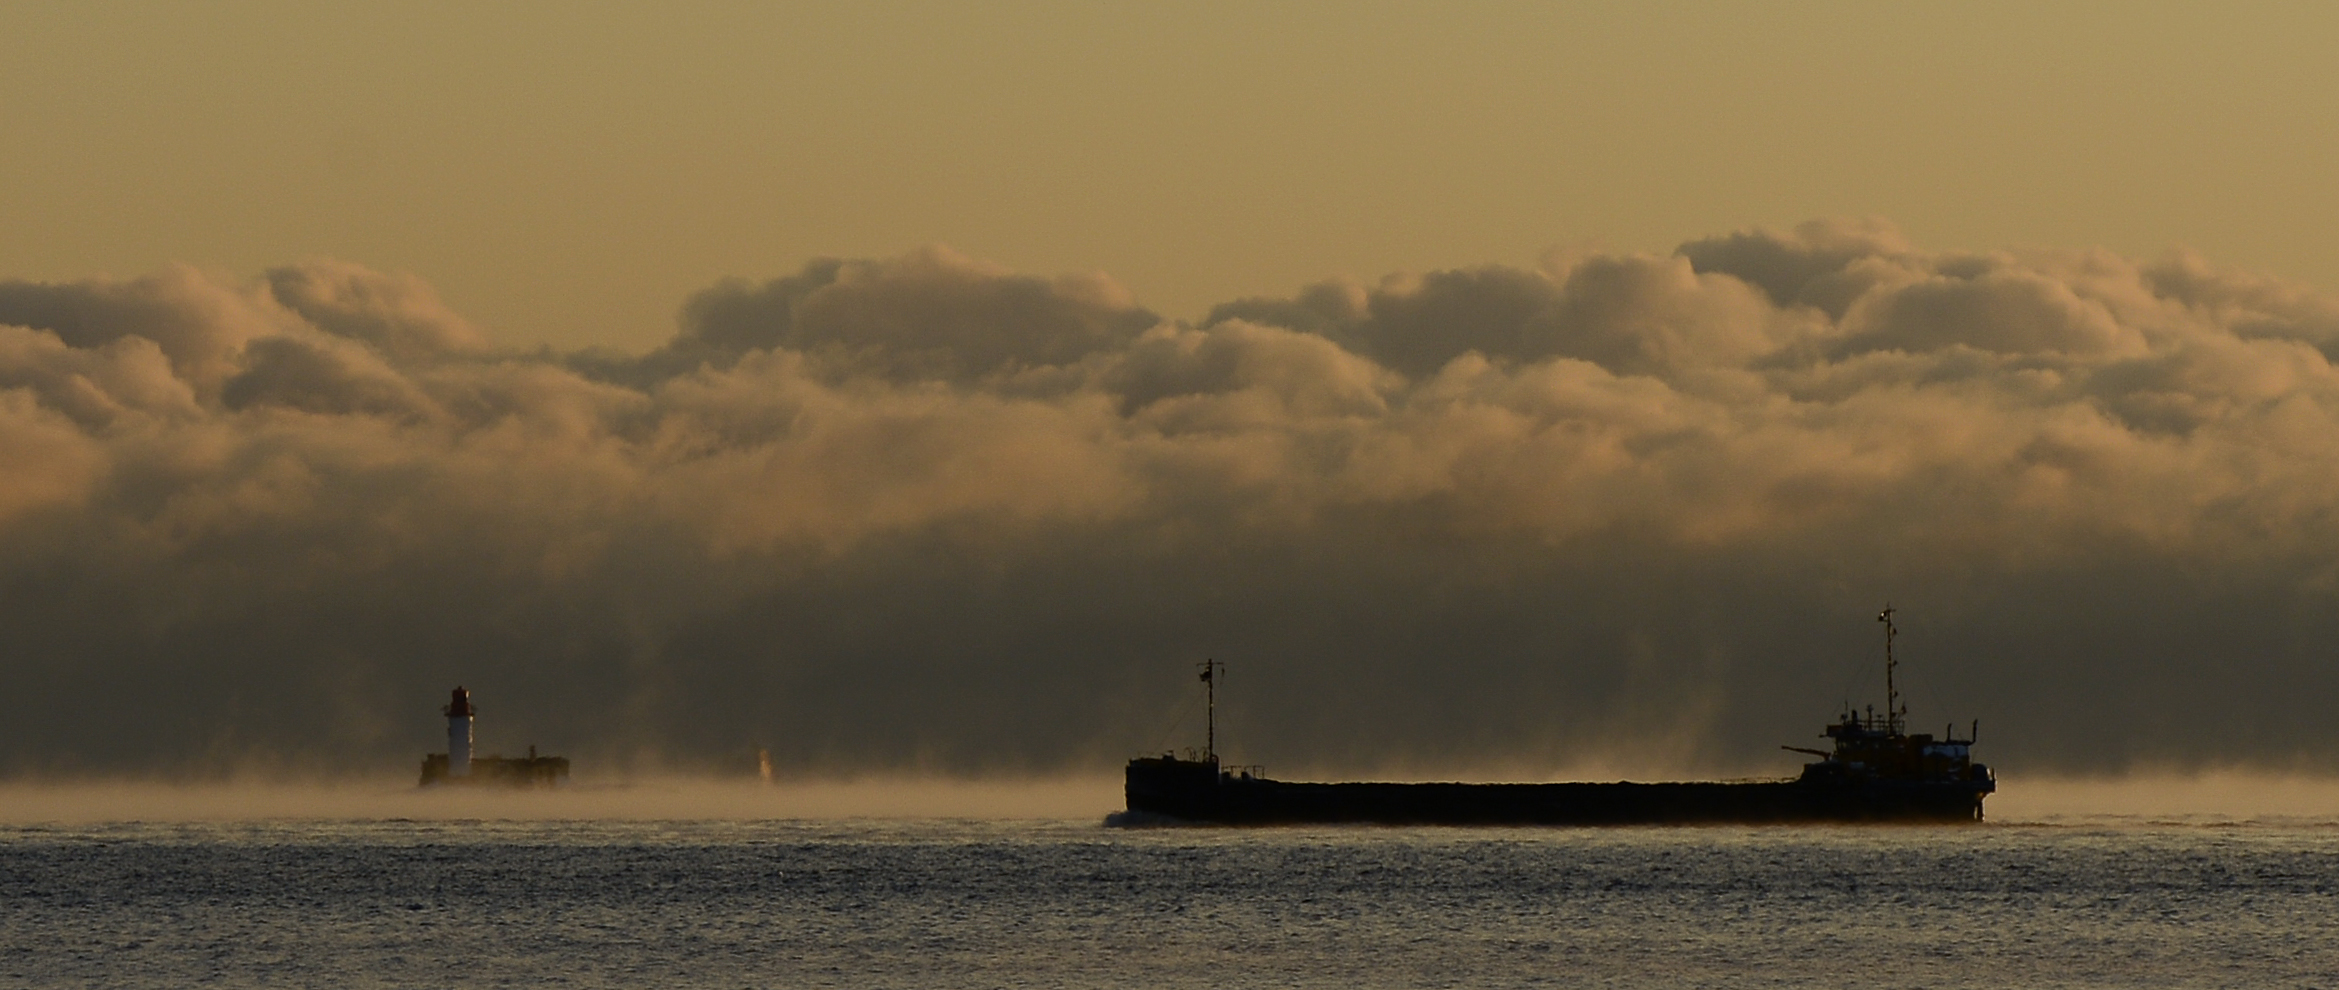 A ship makes it ways through heavy morning fog towards the Baltic Sea outside the northern Swedish city of Sundsvall on November 3, 2012.  A 50 per cent increase in Baltic shipping is expected within the next 30 years. (Jonathan Nackstrand / AFP)